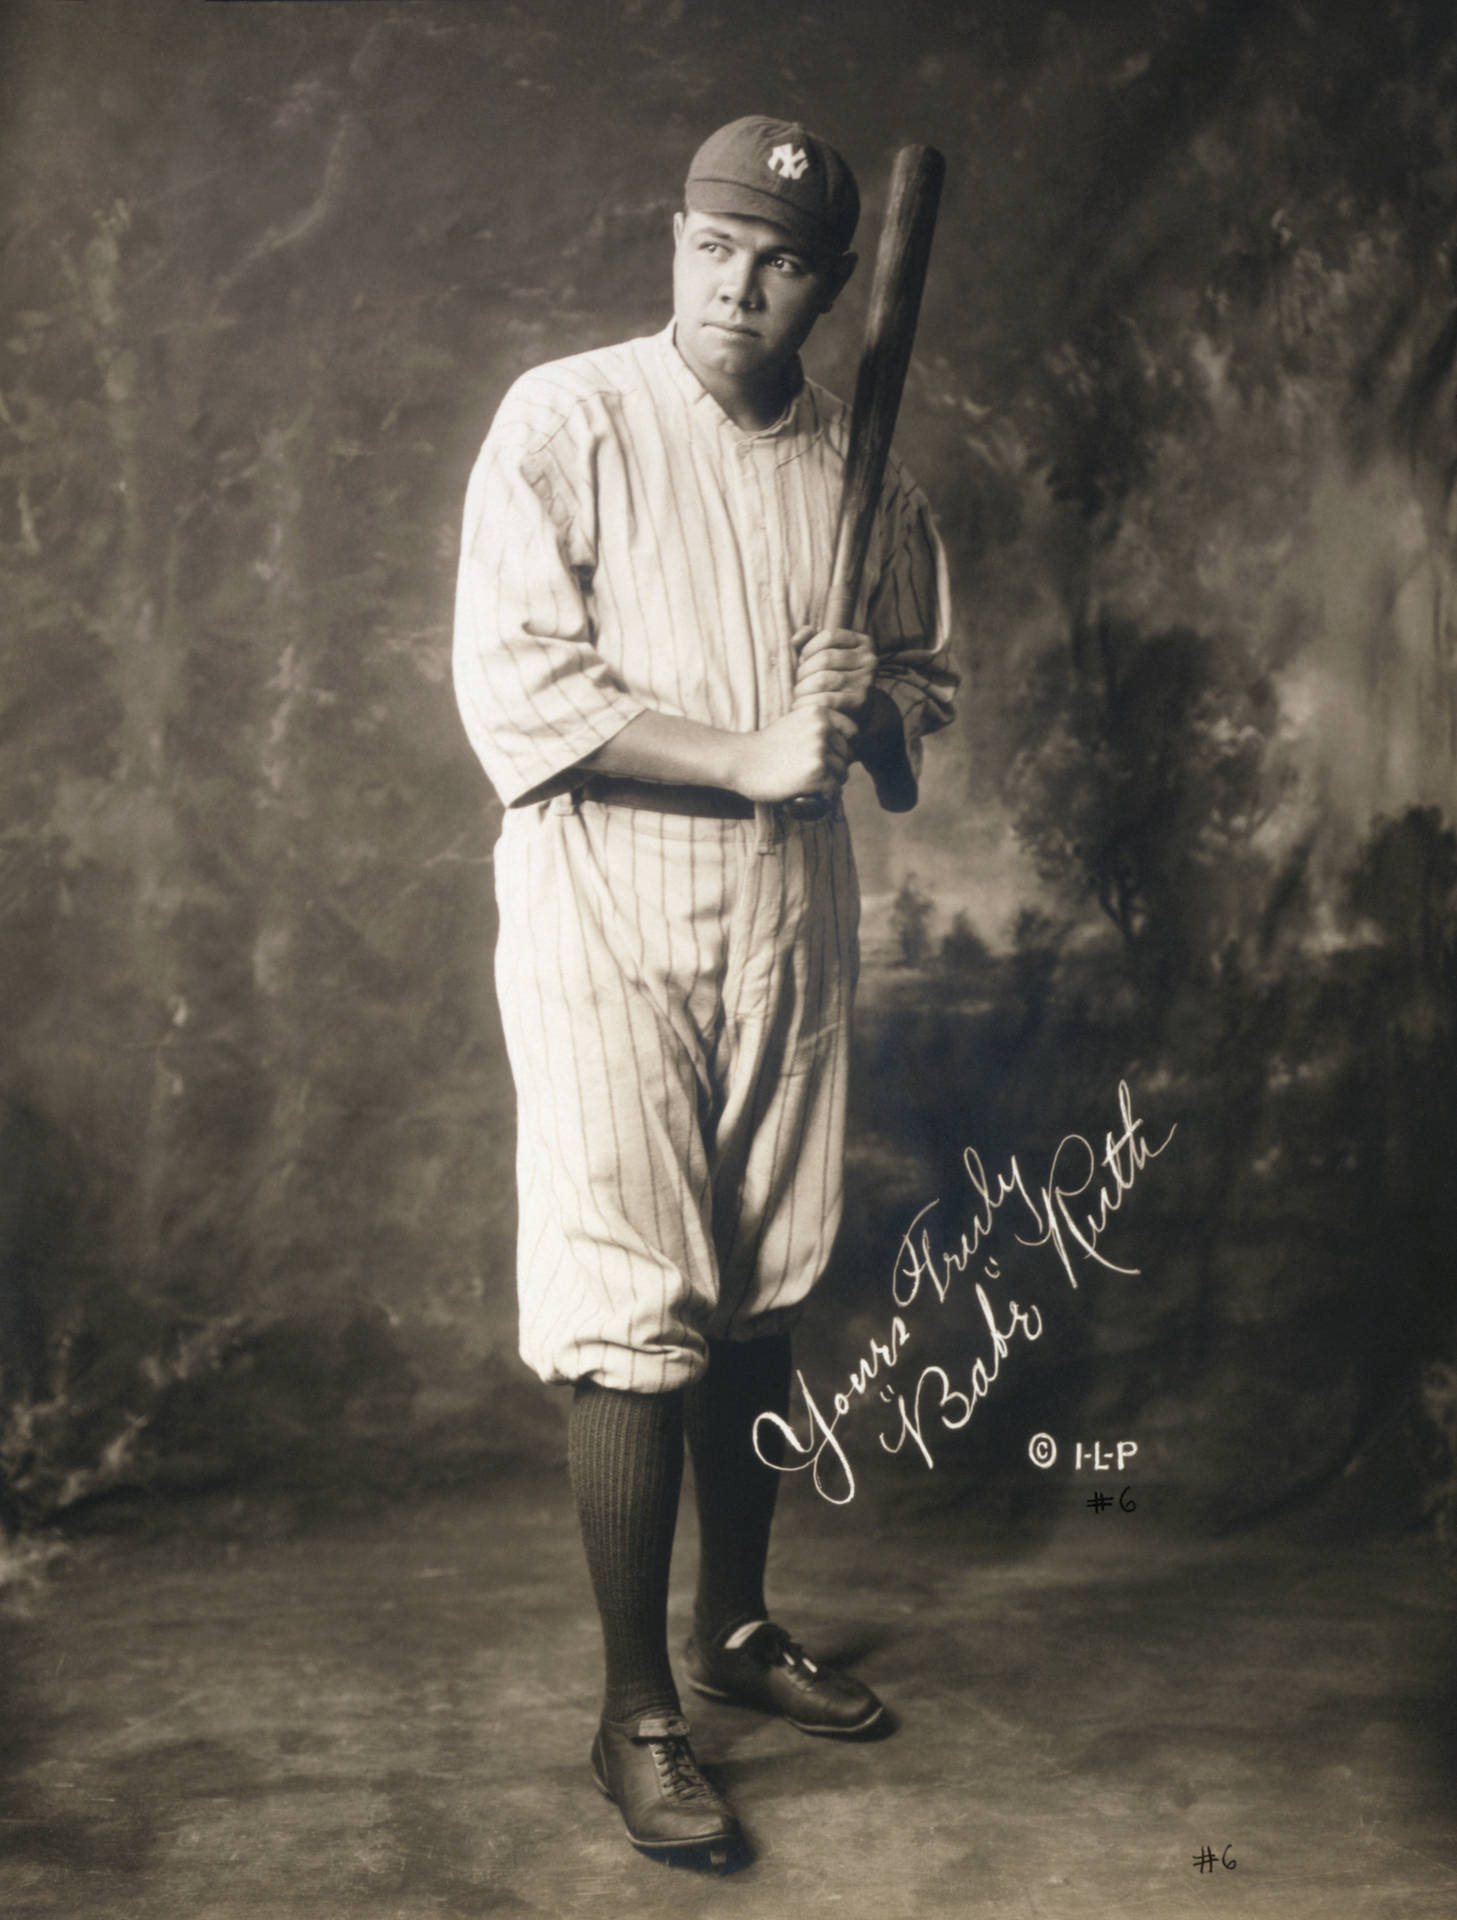 Babe Ruth Poster With Signature